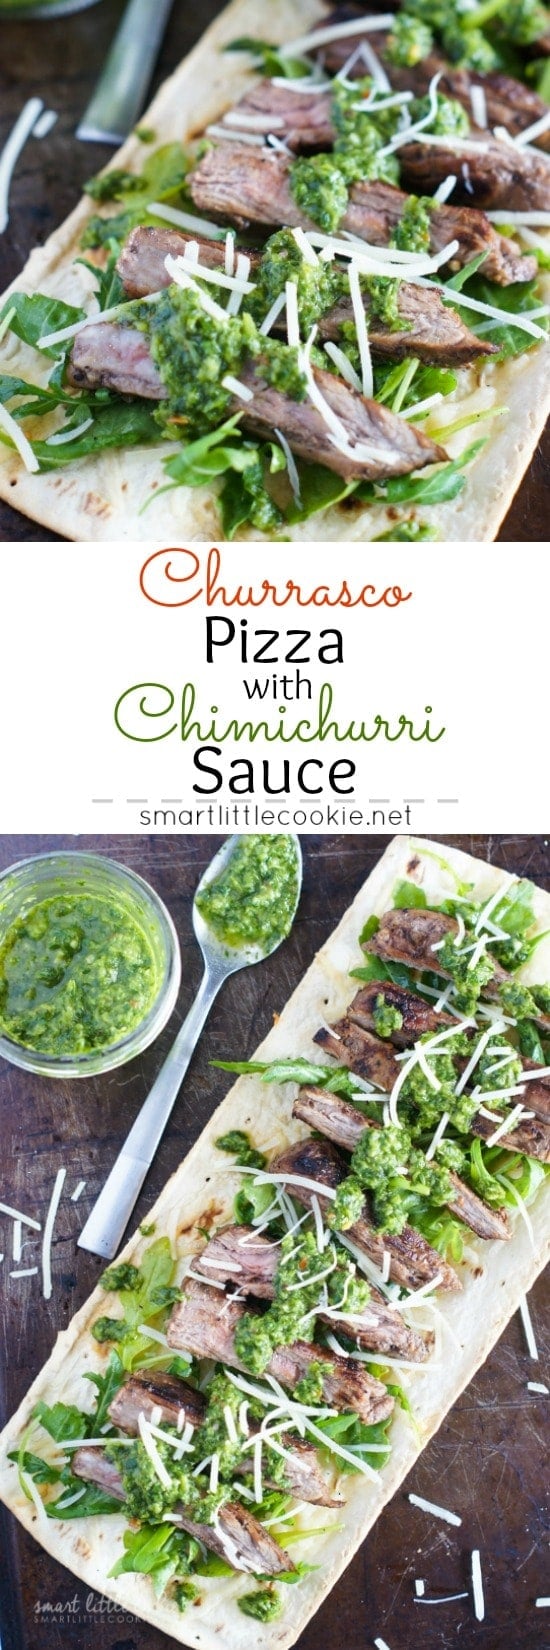 Pinterest graphic. Churrasco pizza with text overlay.